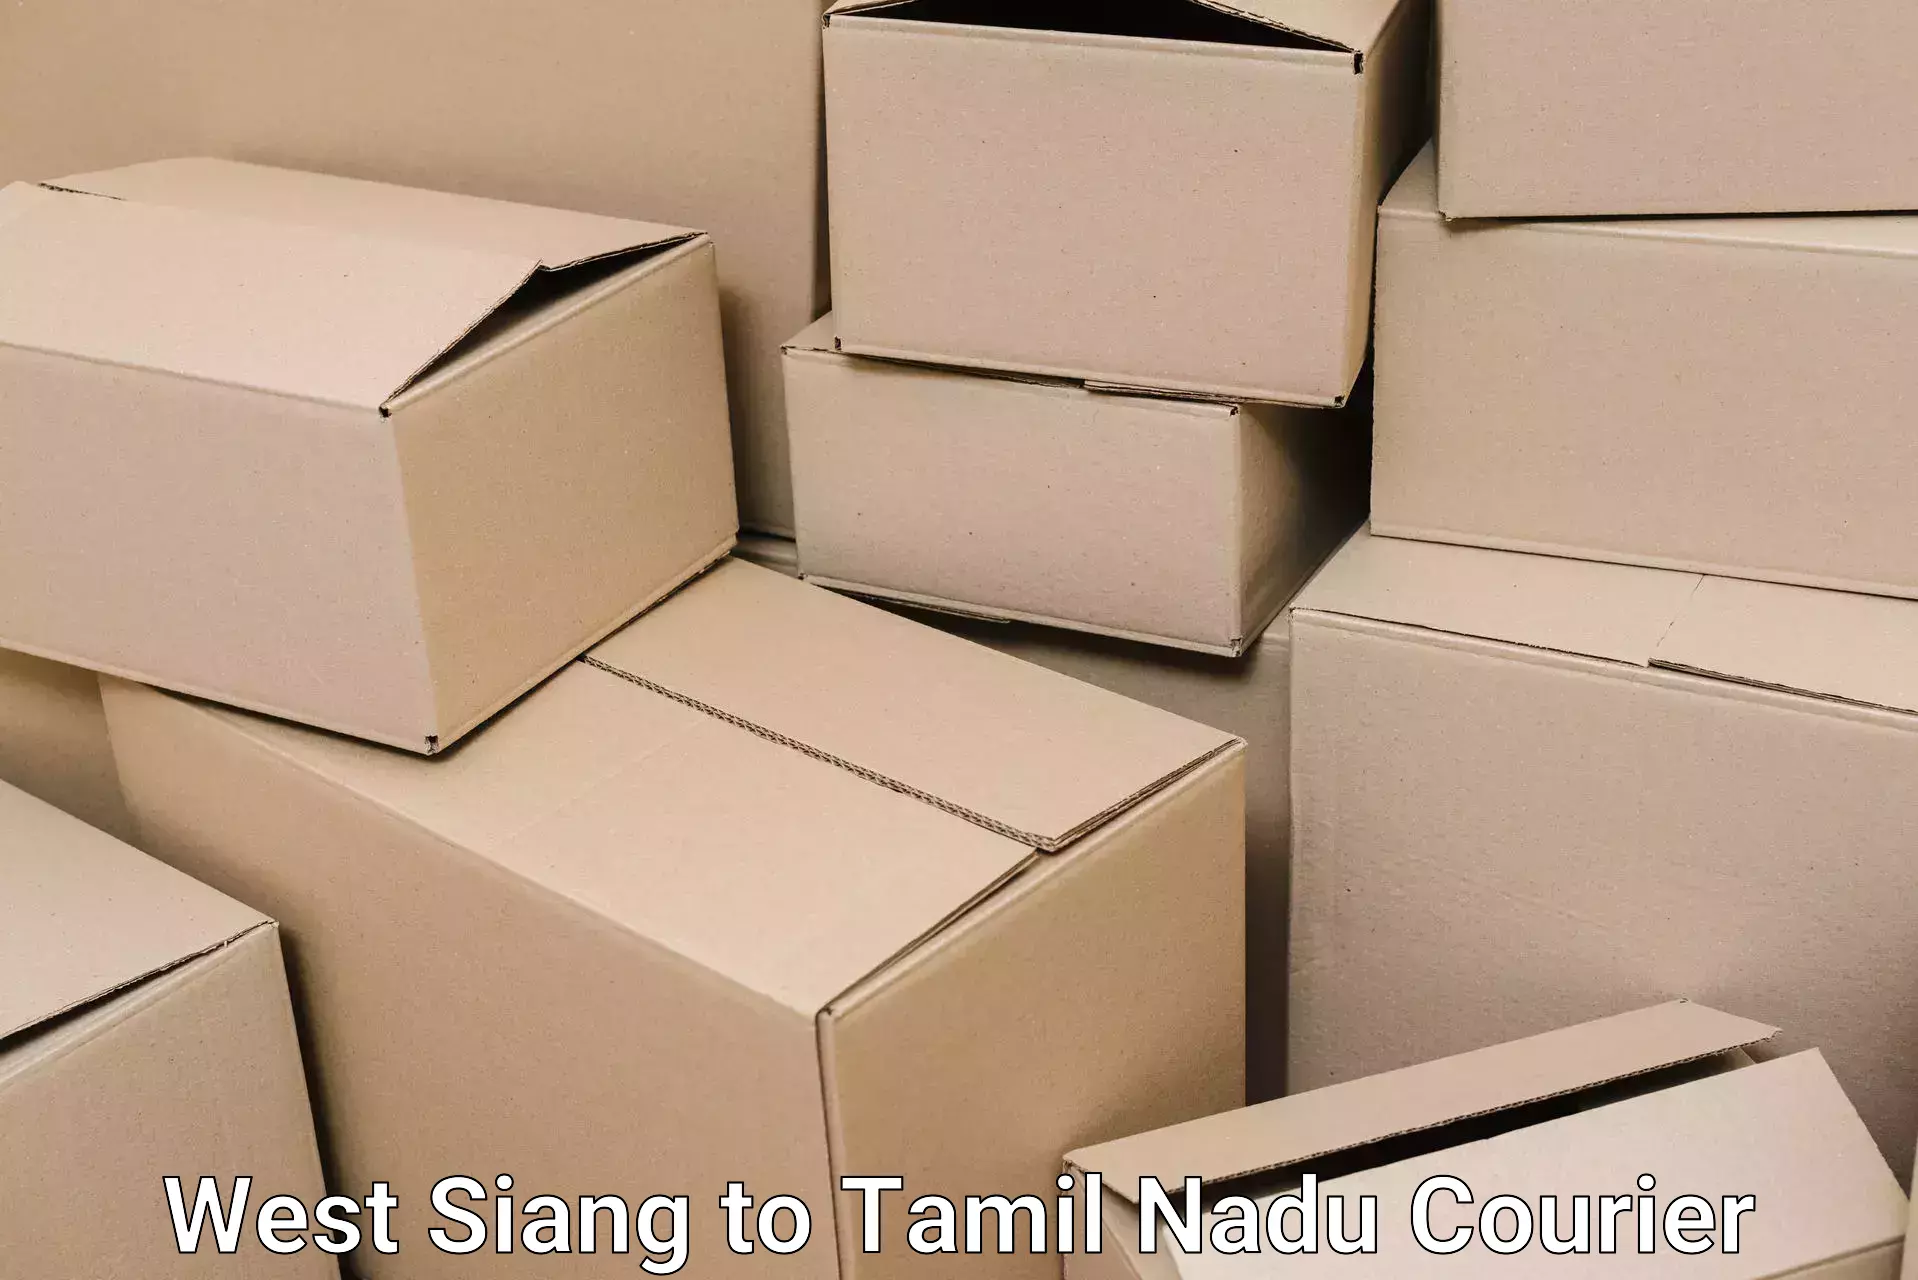 Furniture transport and storage West Siang to Padi